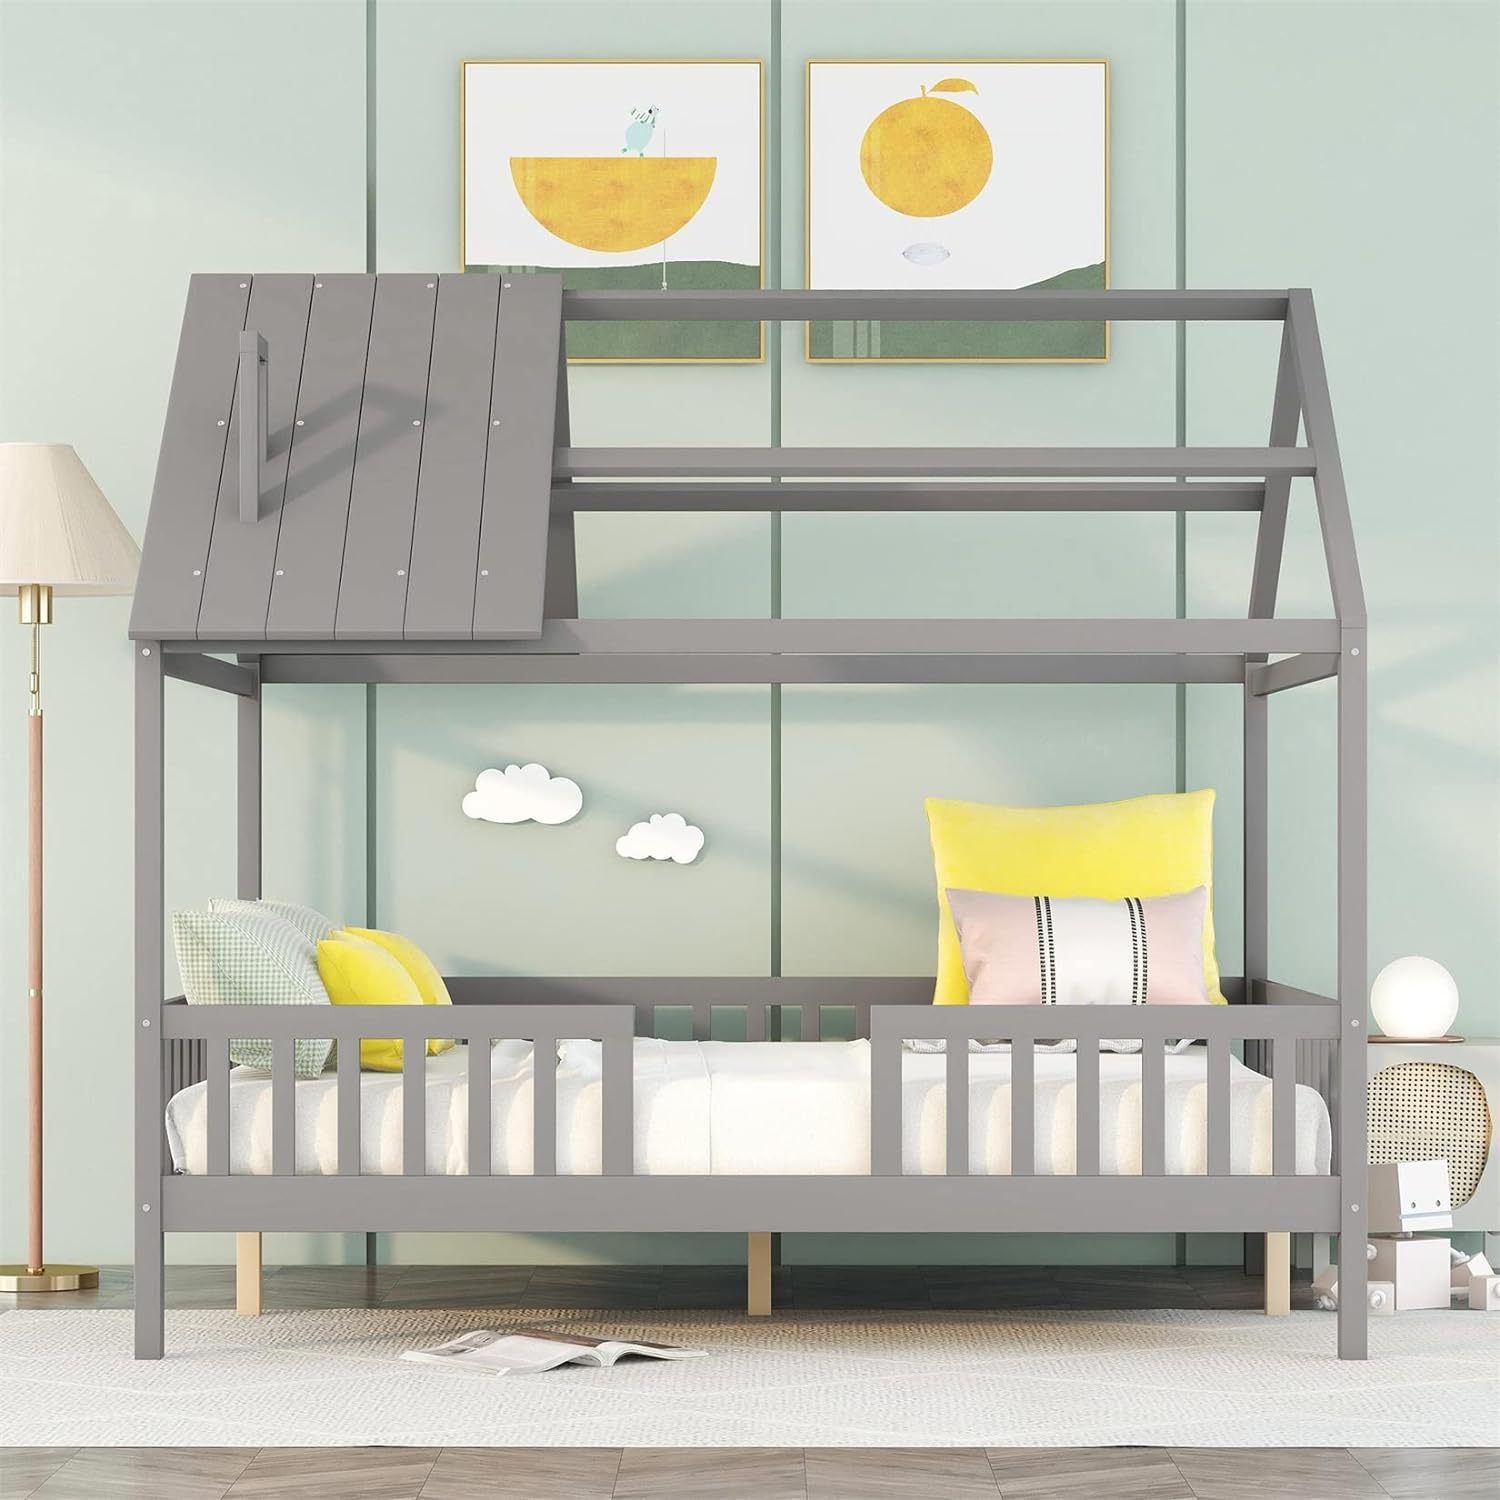 Montessori Inspired House Bed with Legs and Rails